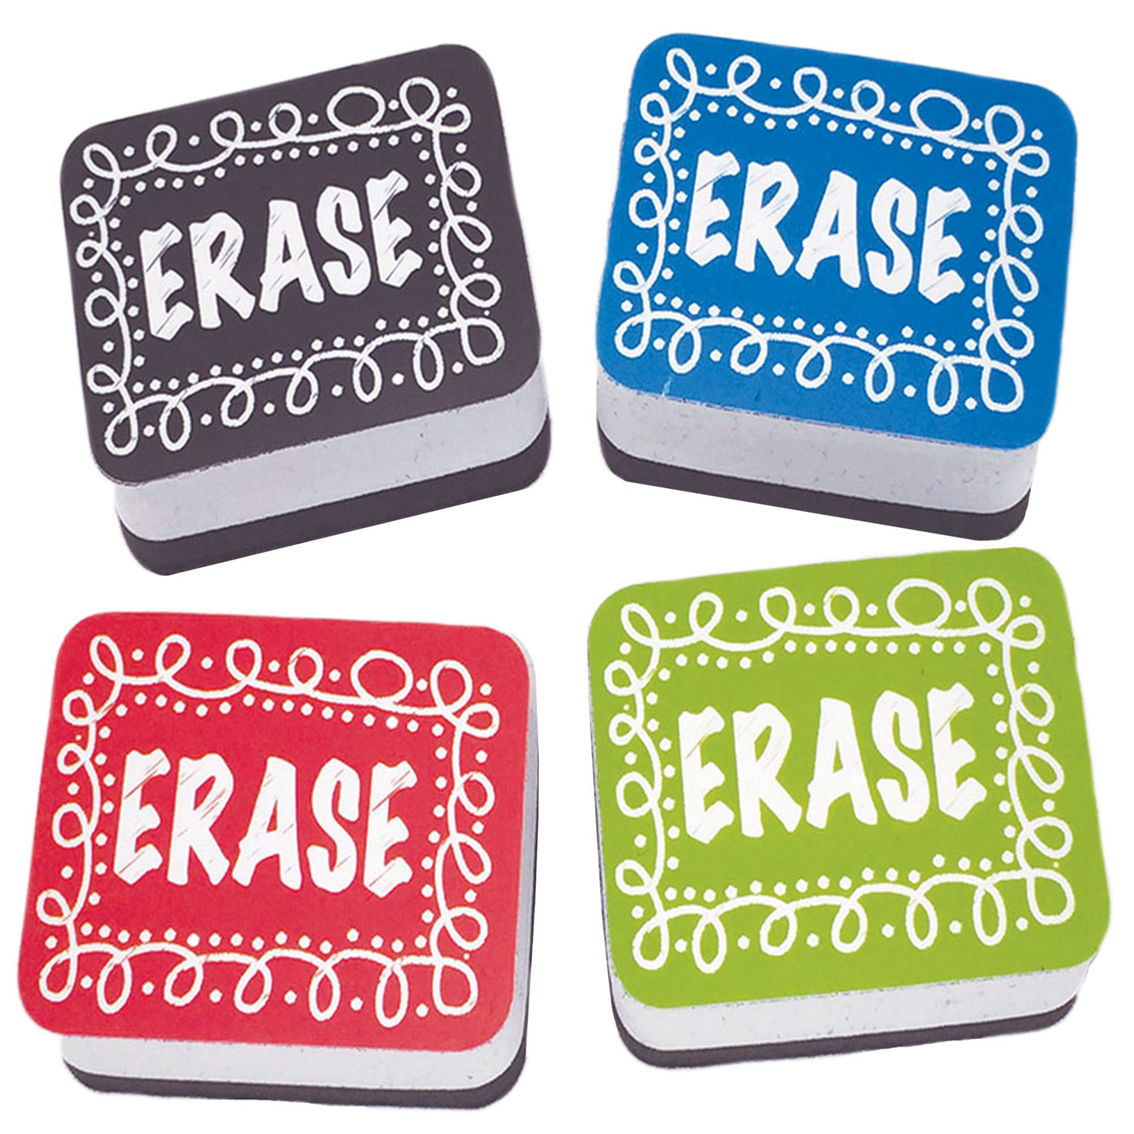 Ashley Productions® Non-Magnetic Mini Whiteboard Erasers, 10 Per Pack, 3 Packs - Image 2 of 2